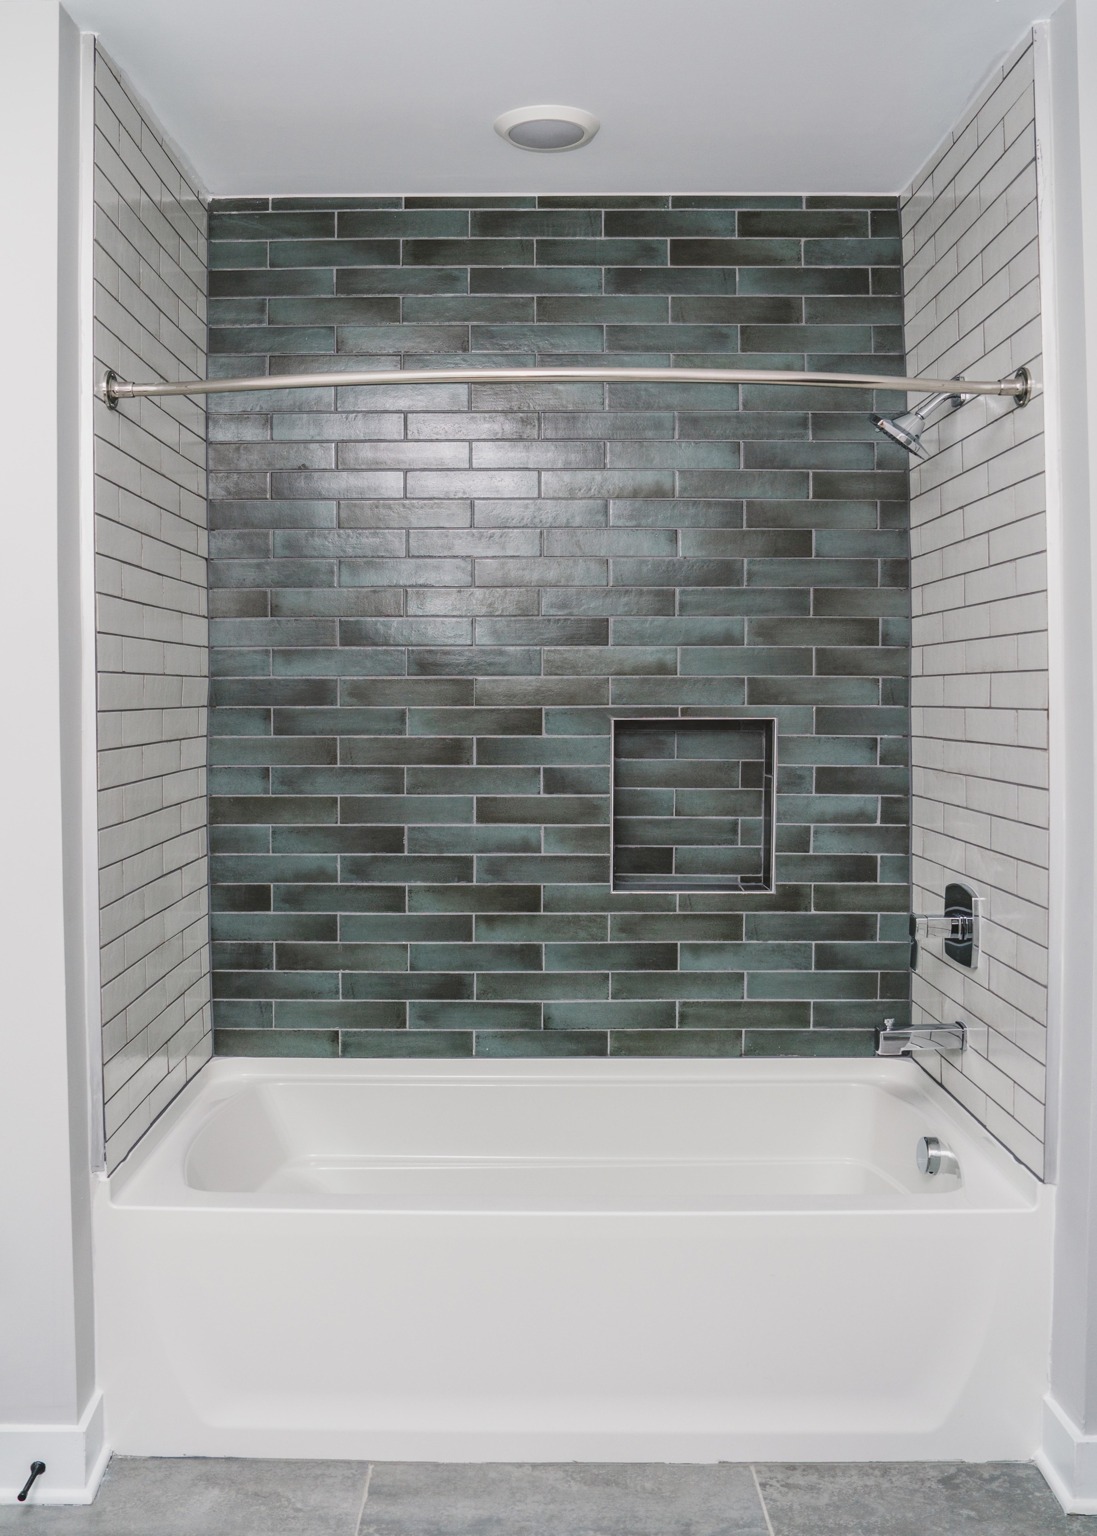 soaking tub in spa-like bathroom at modera germantown apartment homes for rent in nashville tennessee